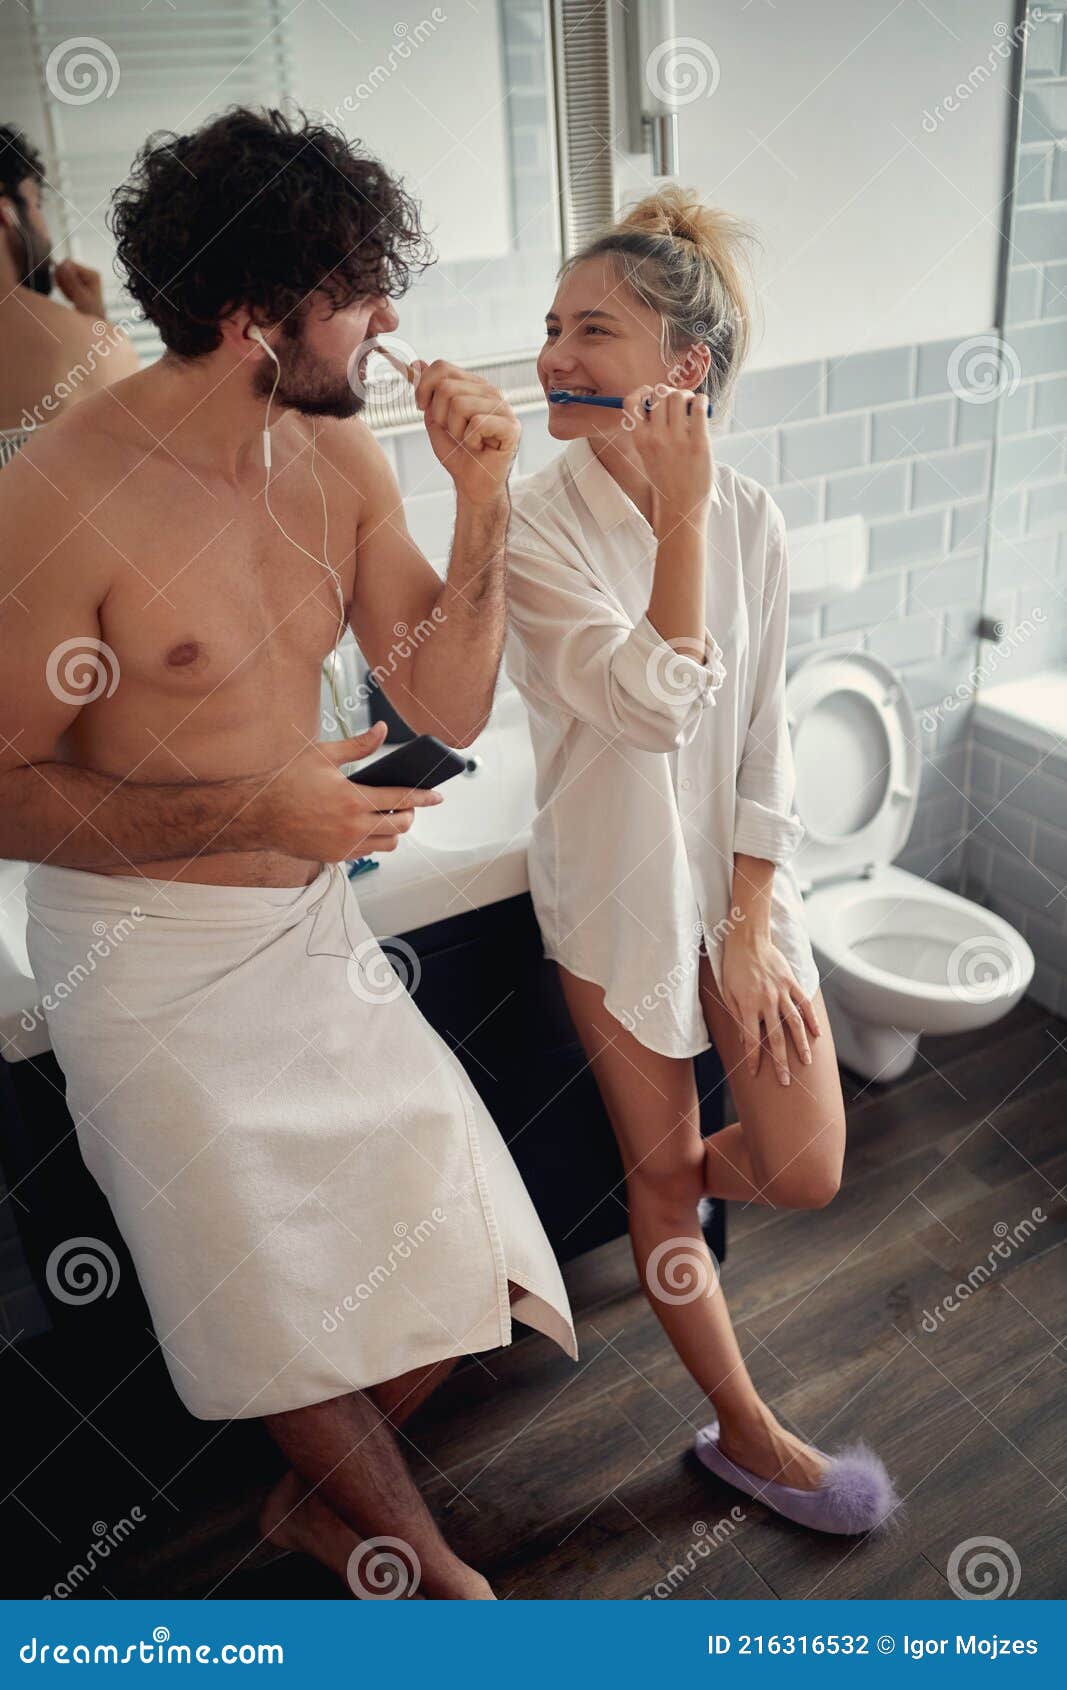 Hot Couple Enjoying Their Relation and Screw in Back Pose